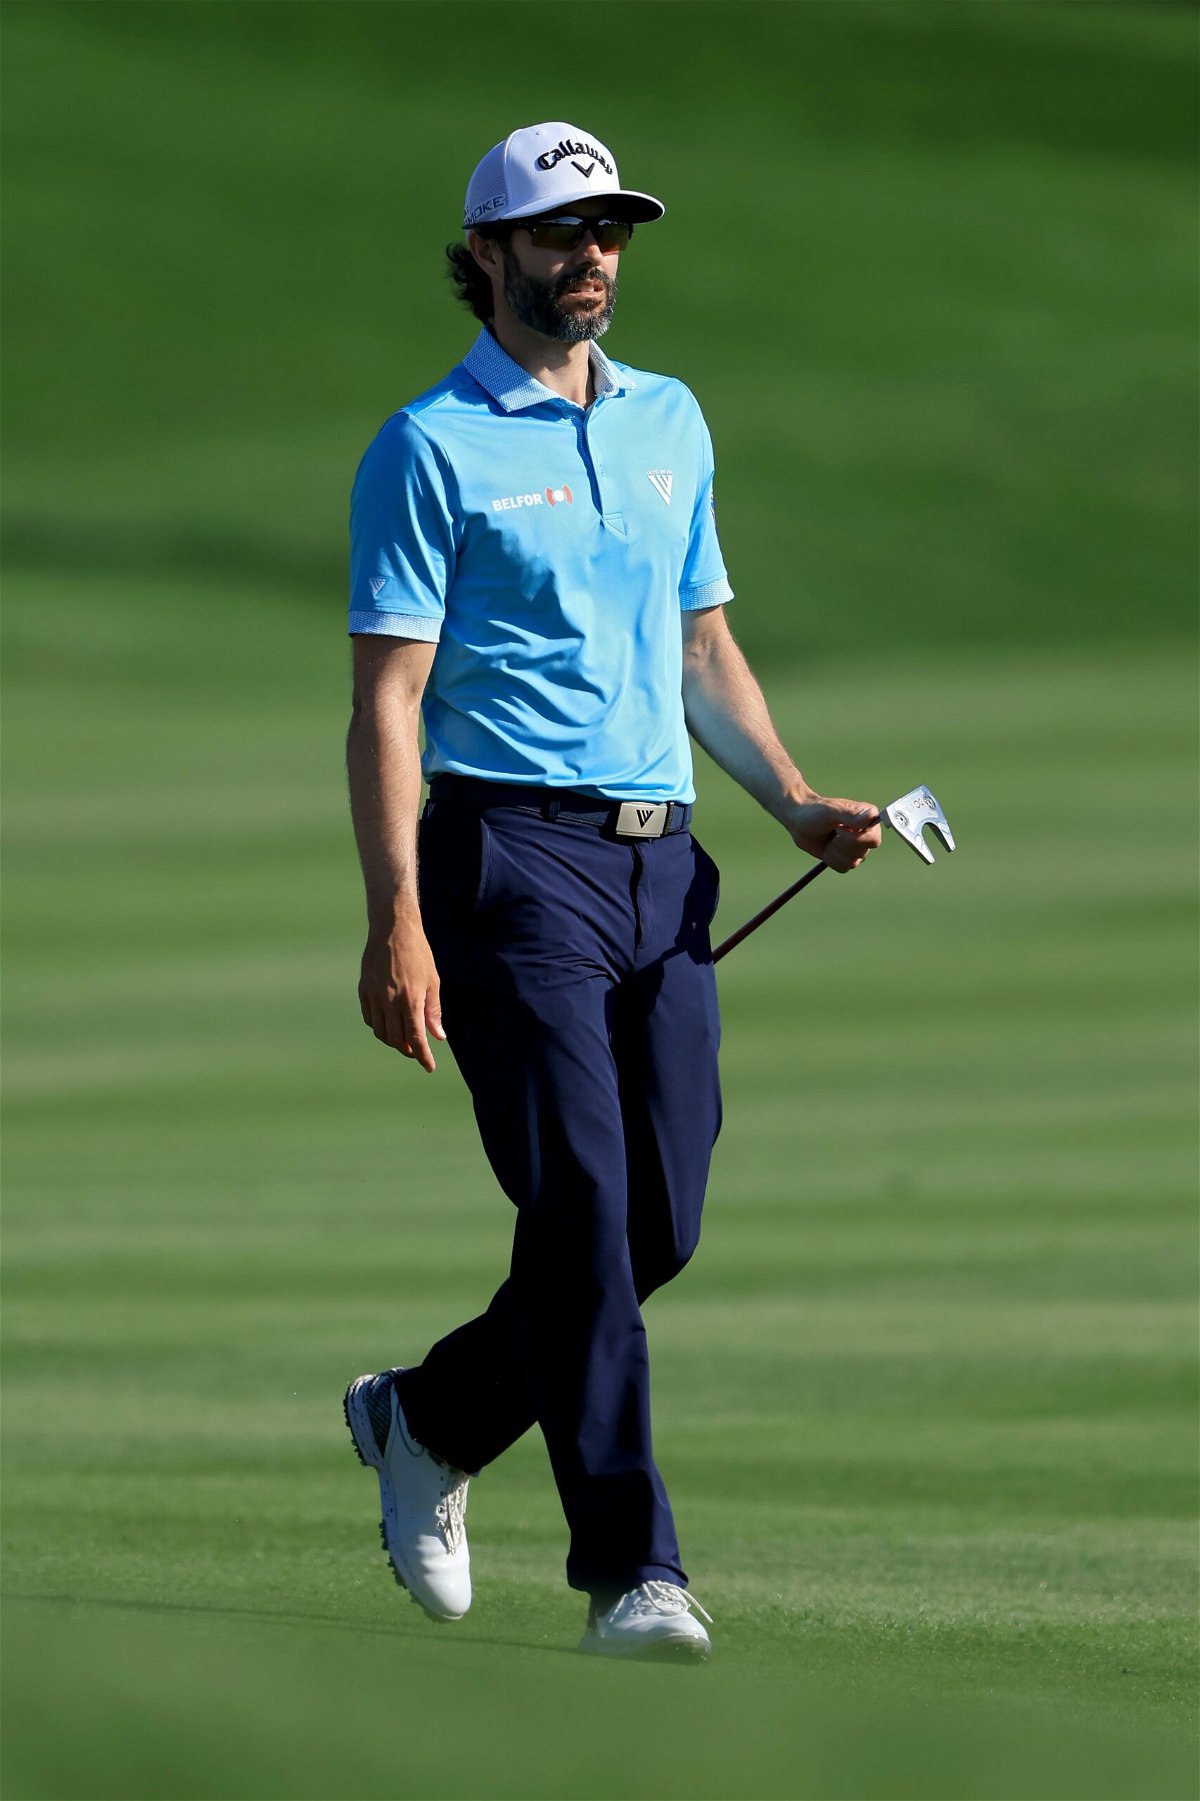 <i>Sam Greenwood/Getty Images via CNN Newsource</i><br/>Adam Hadwin of Canada walks to the fourth green during the first round of THE PLAYERS Championship on the Stadium Course at TPC Sawgrass on March 14